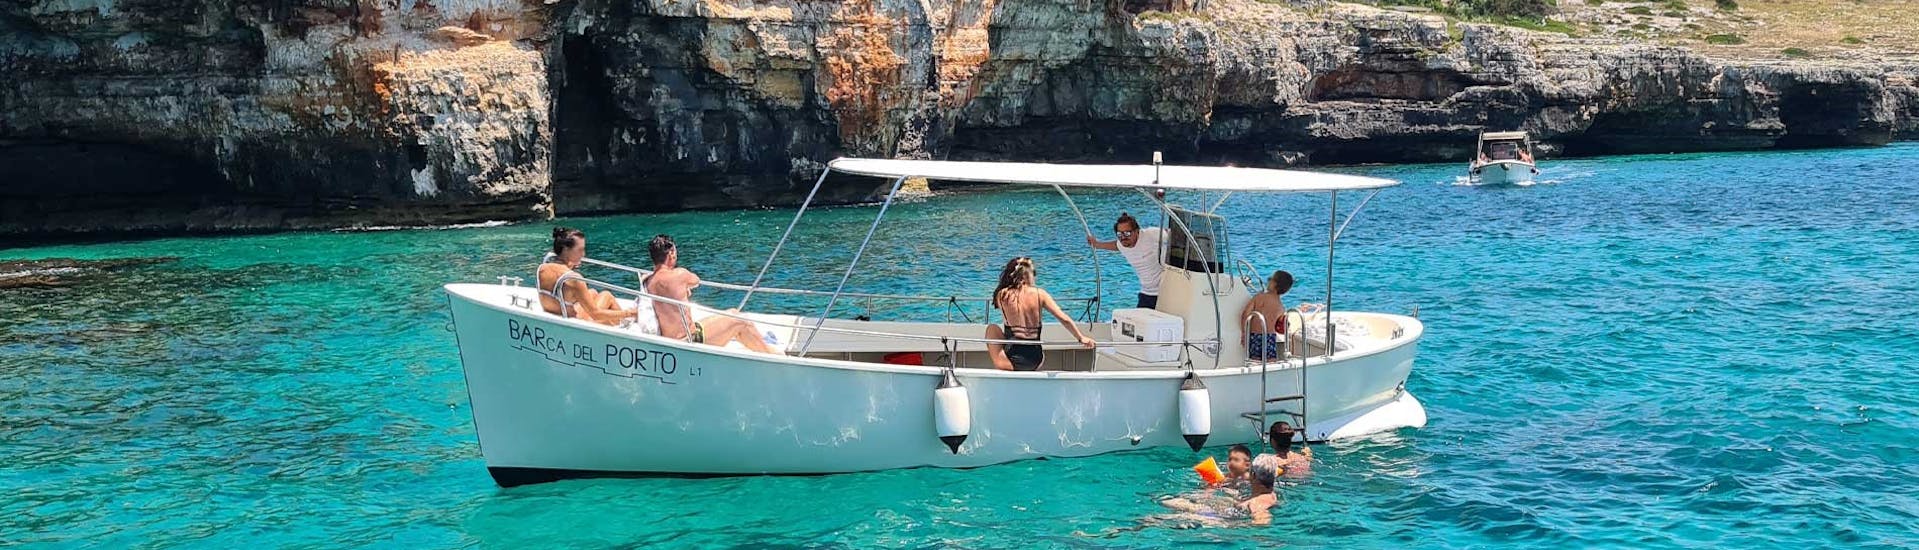 Private Boat Trip from Santa Maria di Leuca to the Caves (up to 11 people).